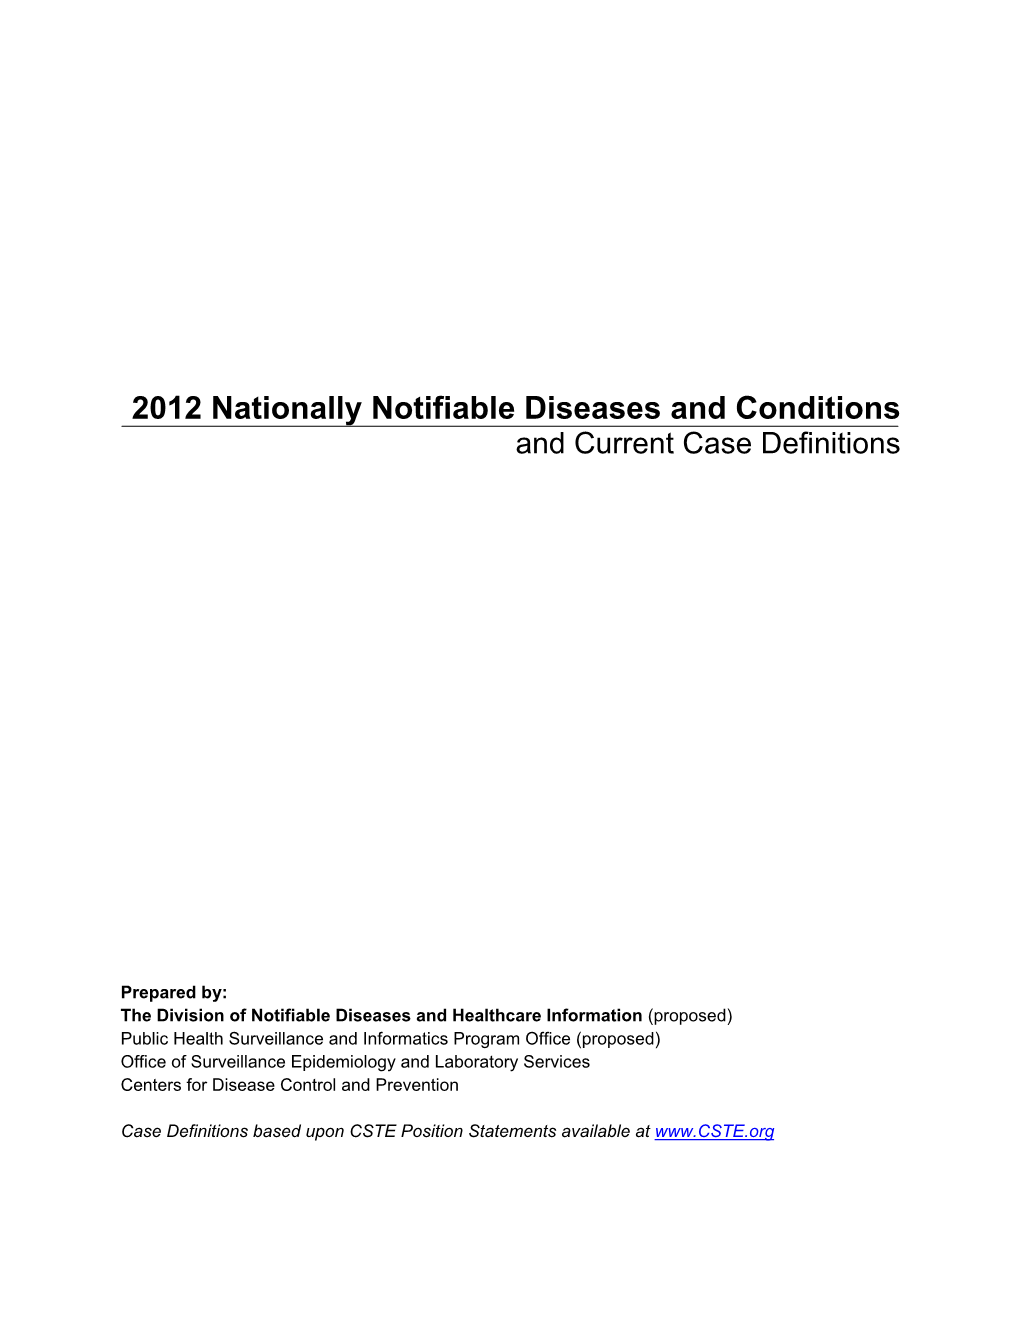 2012 Nationally Notifiable Diseases and Conditions and Current Case Definitions